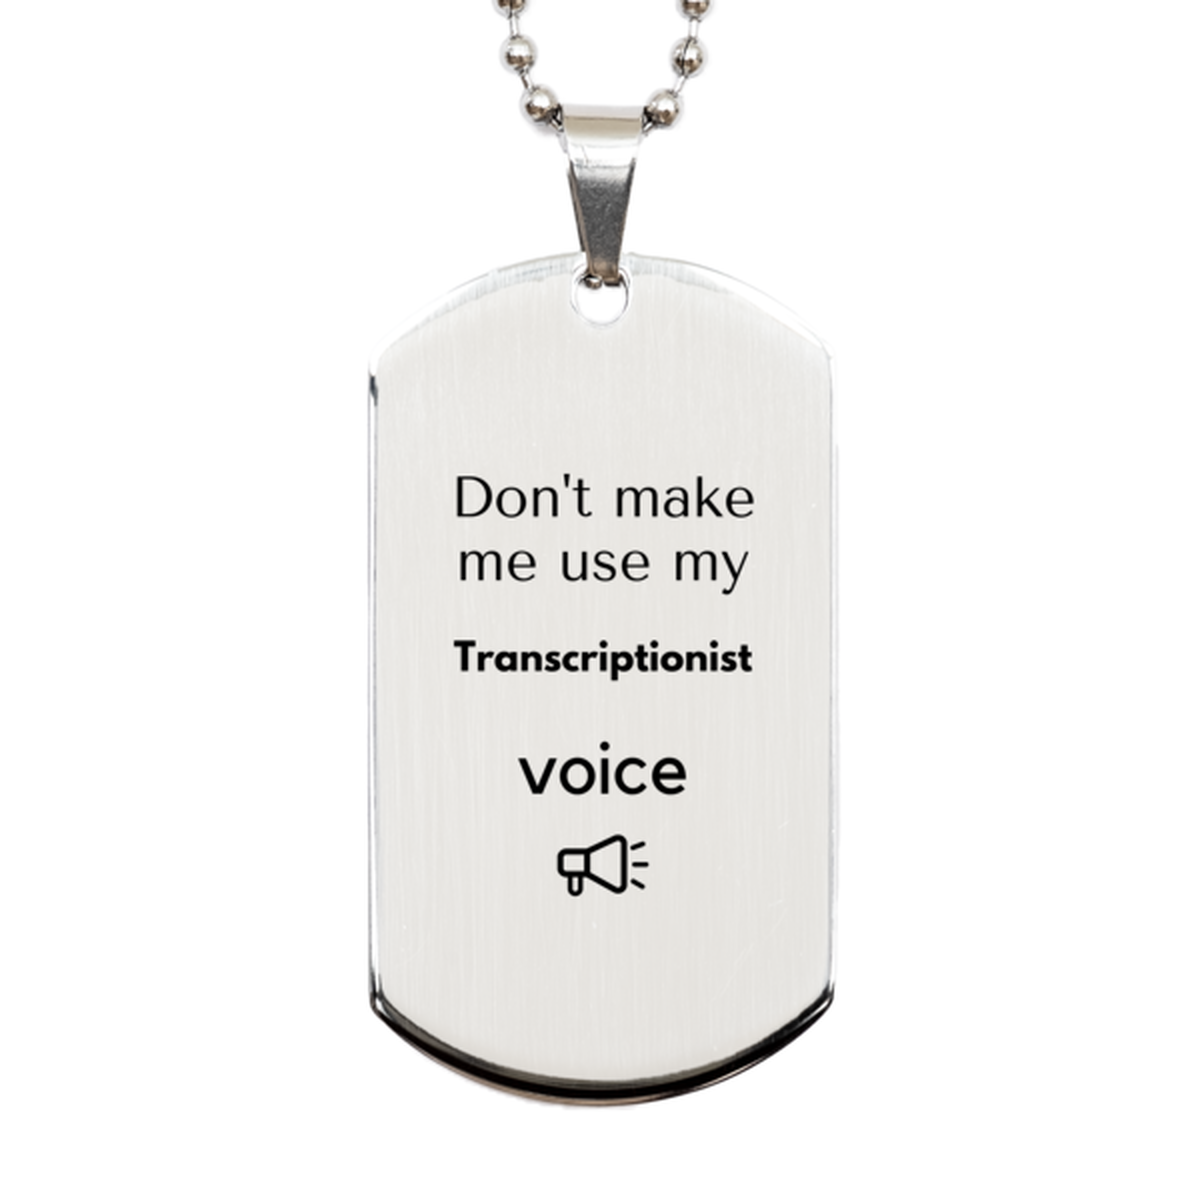 Don't make me use my Transcriptionist voice, Sarcasm Transcriptionist Gifts, Christmas Transcriptionist Silver Dog Tag Birthday Unique Gifts For Transcriptionist Coworkers, Men, Women, Colleague, Friends